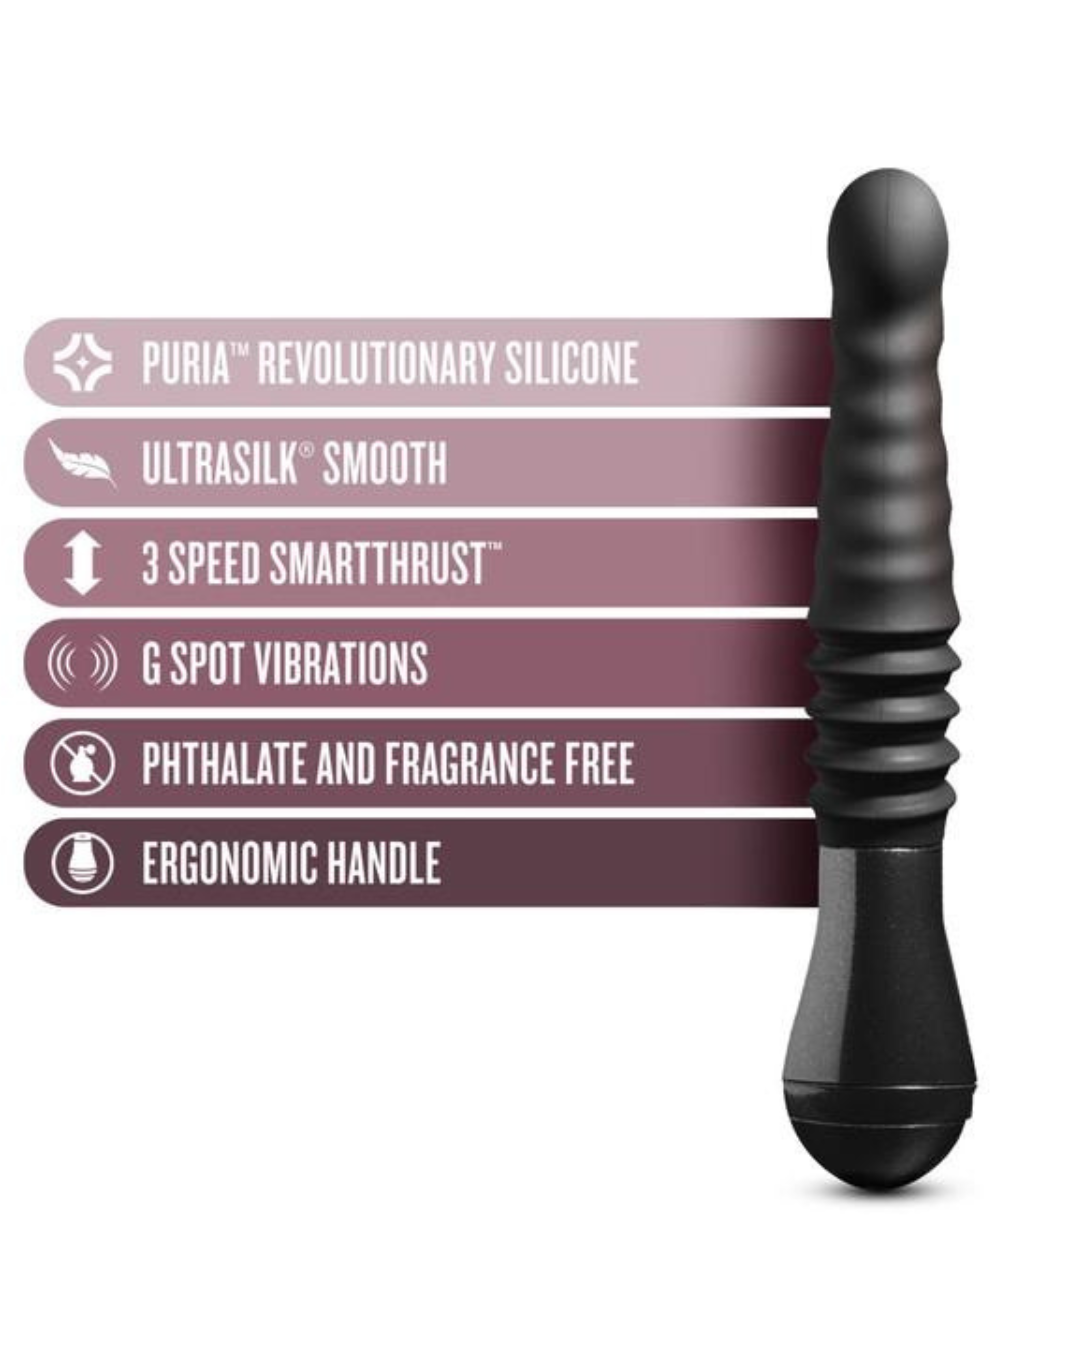 Lazarus Thrusting G-Spot and Prostate 10 Inch Dildo with features listed beside it on a white background